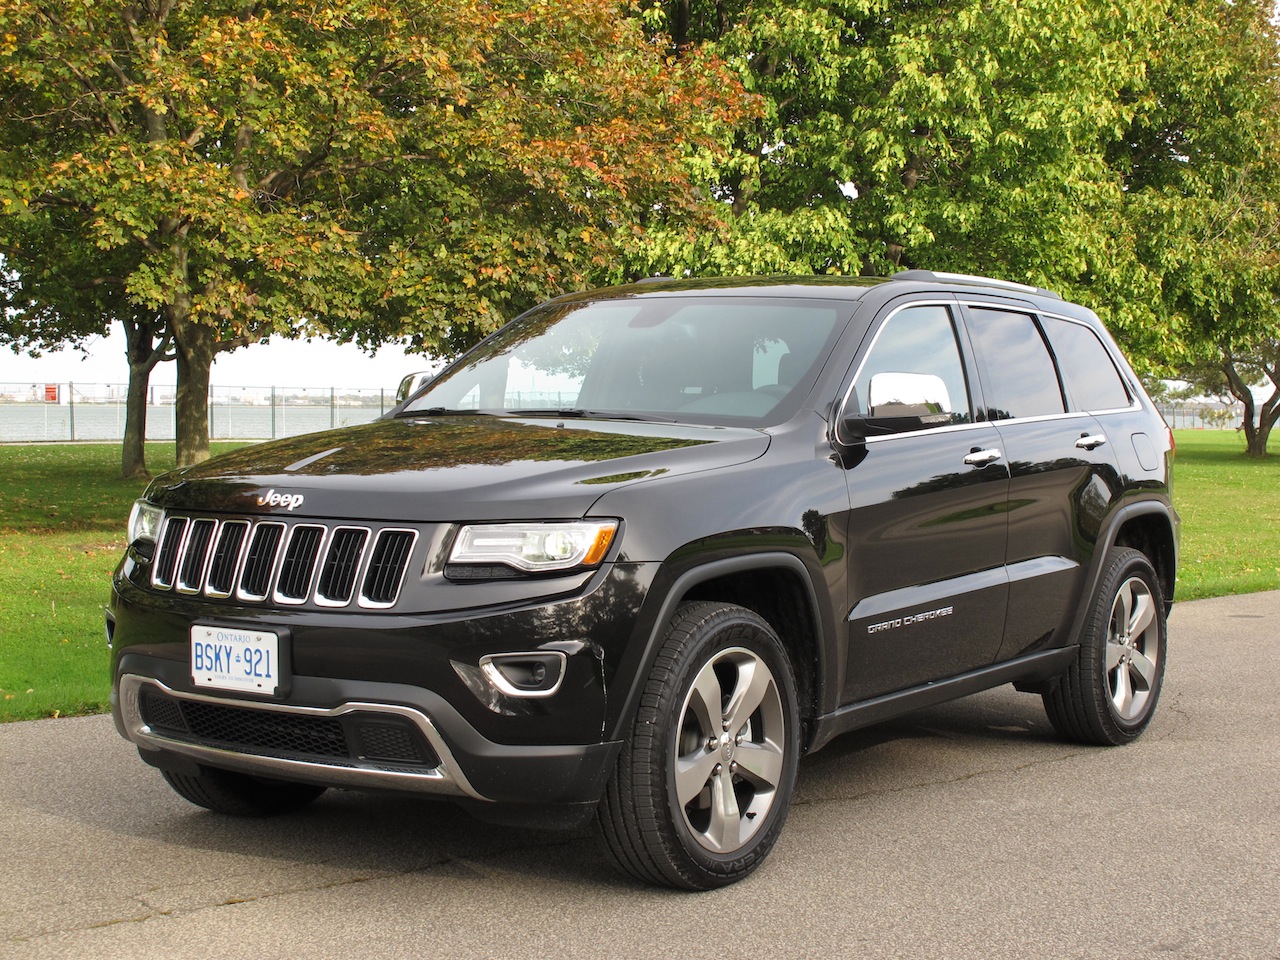 Canadian Auto Review - 2014 Jeep Grand Cherokee Photos.